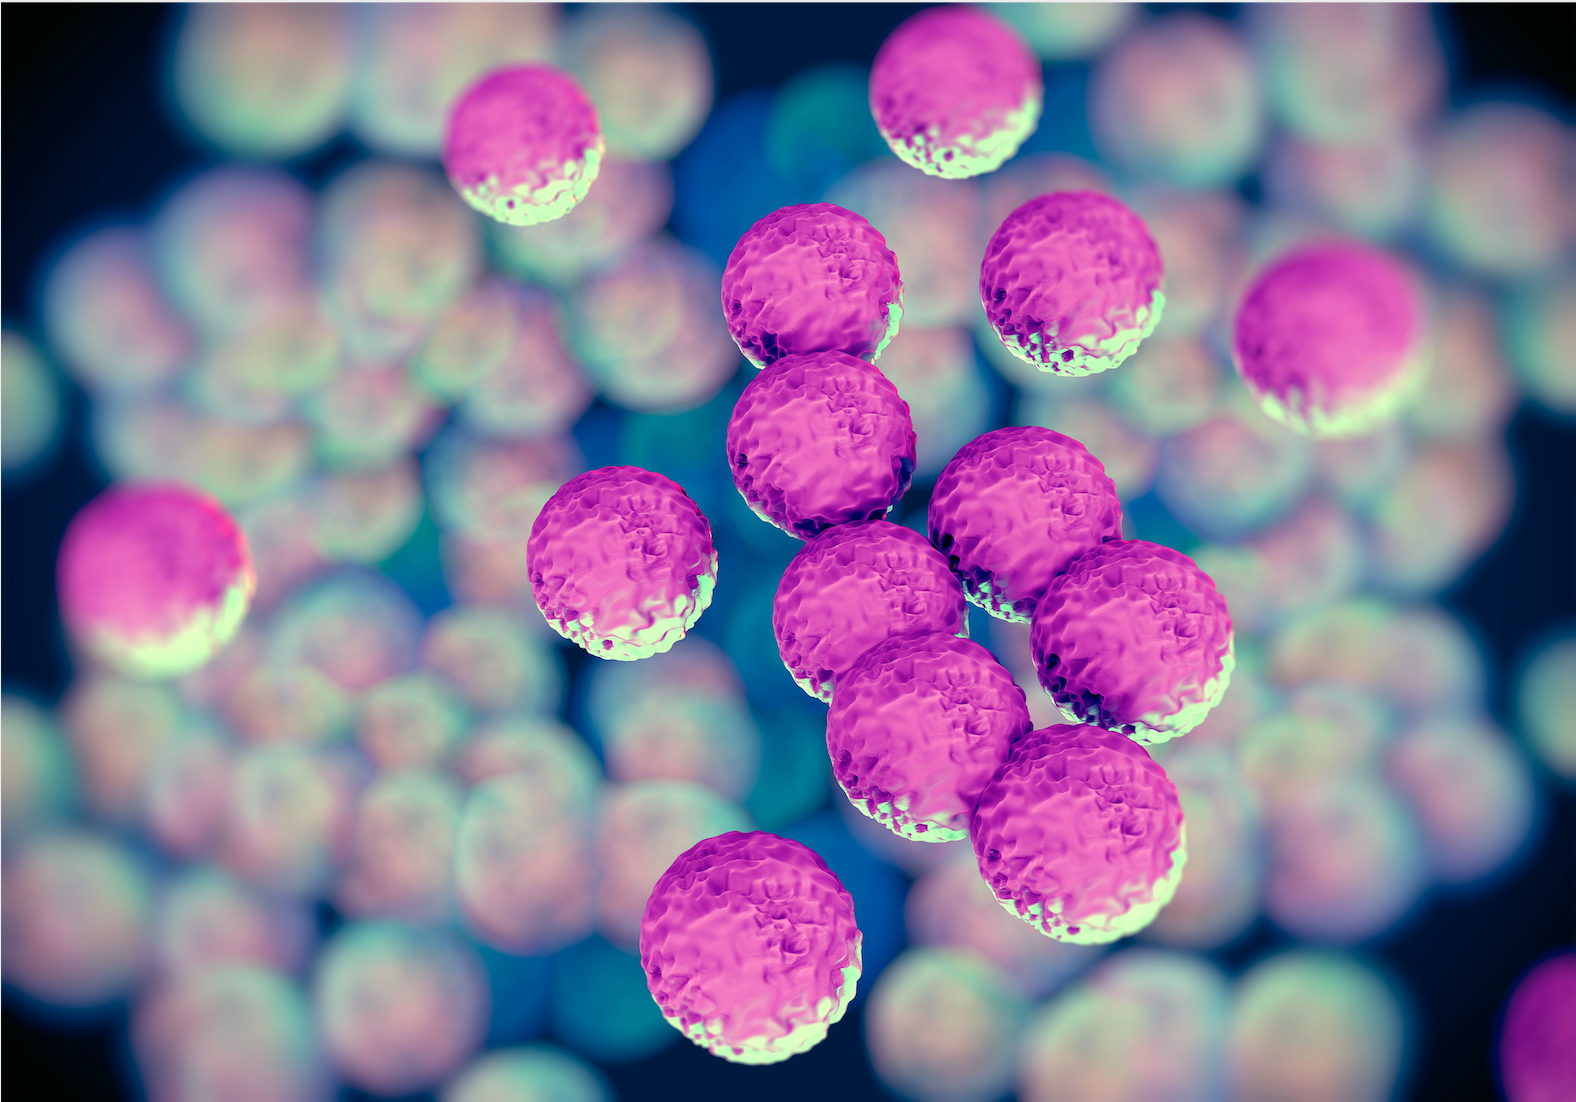 What’s New From the CLSI Subcommittee on Antimicrobial Susceptibility Testing